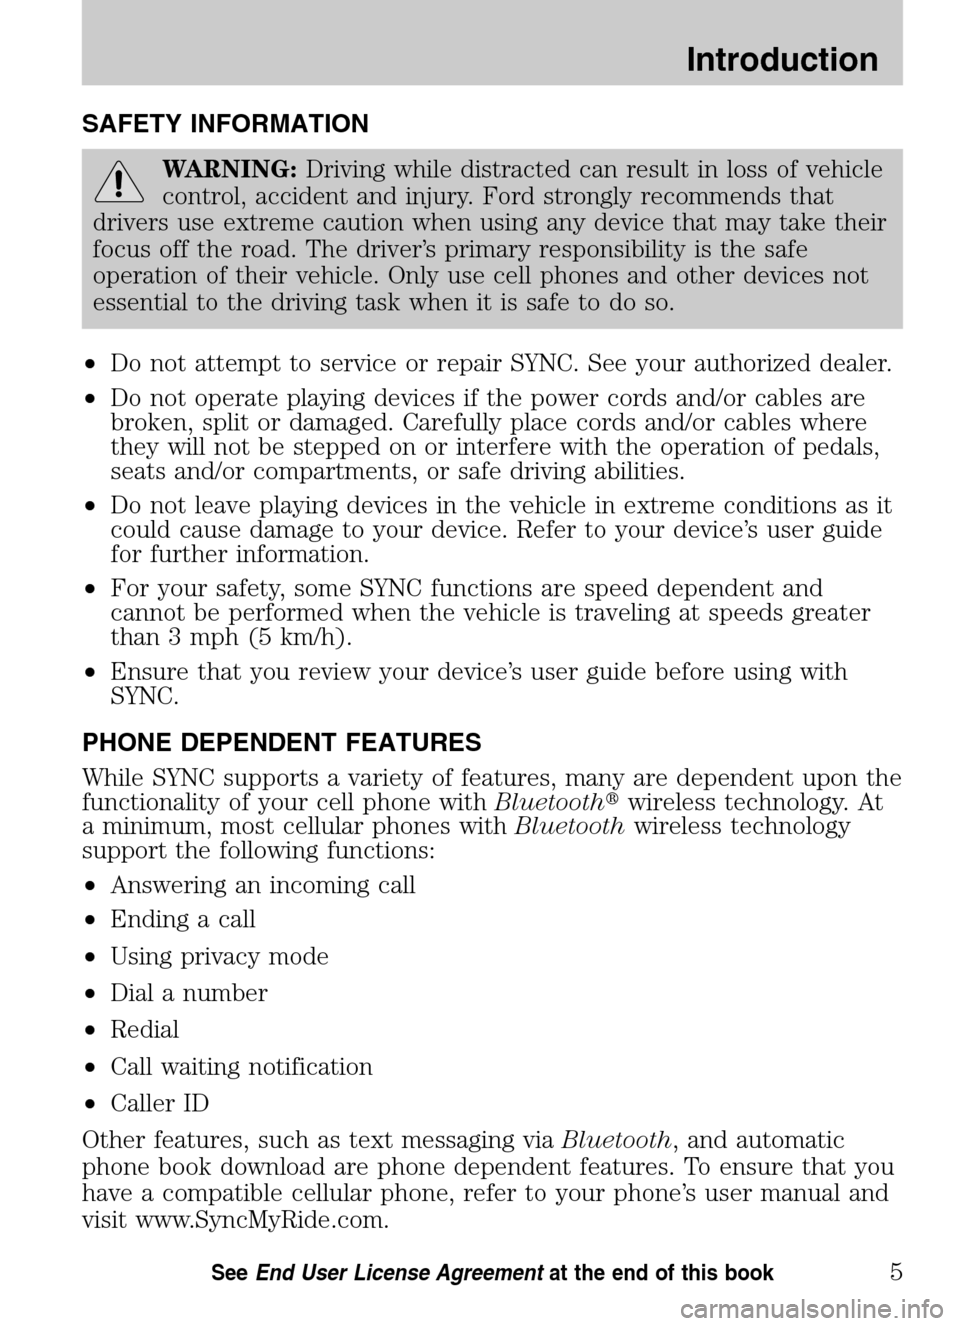 Mercury Sable 2009  SYNC Supplement  SAFETY INFORMATION
WARNING:Driving while distracted can result in loss of vehicle 
control, accident and injury. Ford strongly recommends that
drivers use extreme caution when using any device that ma